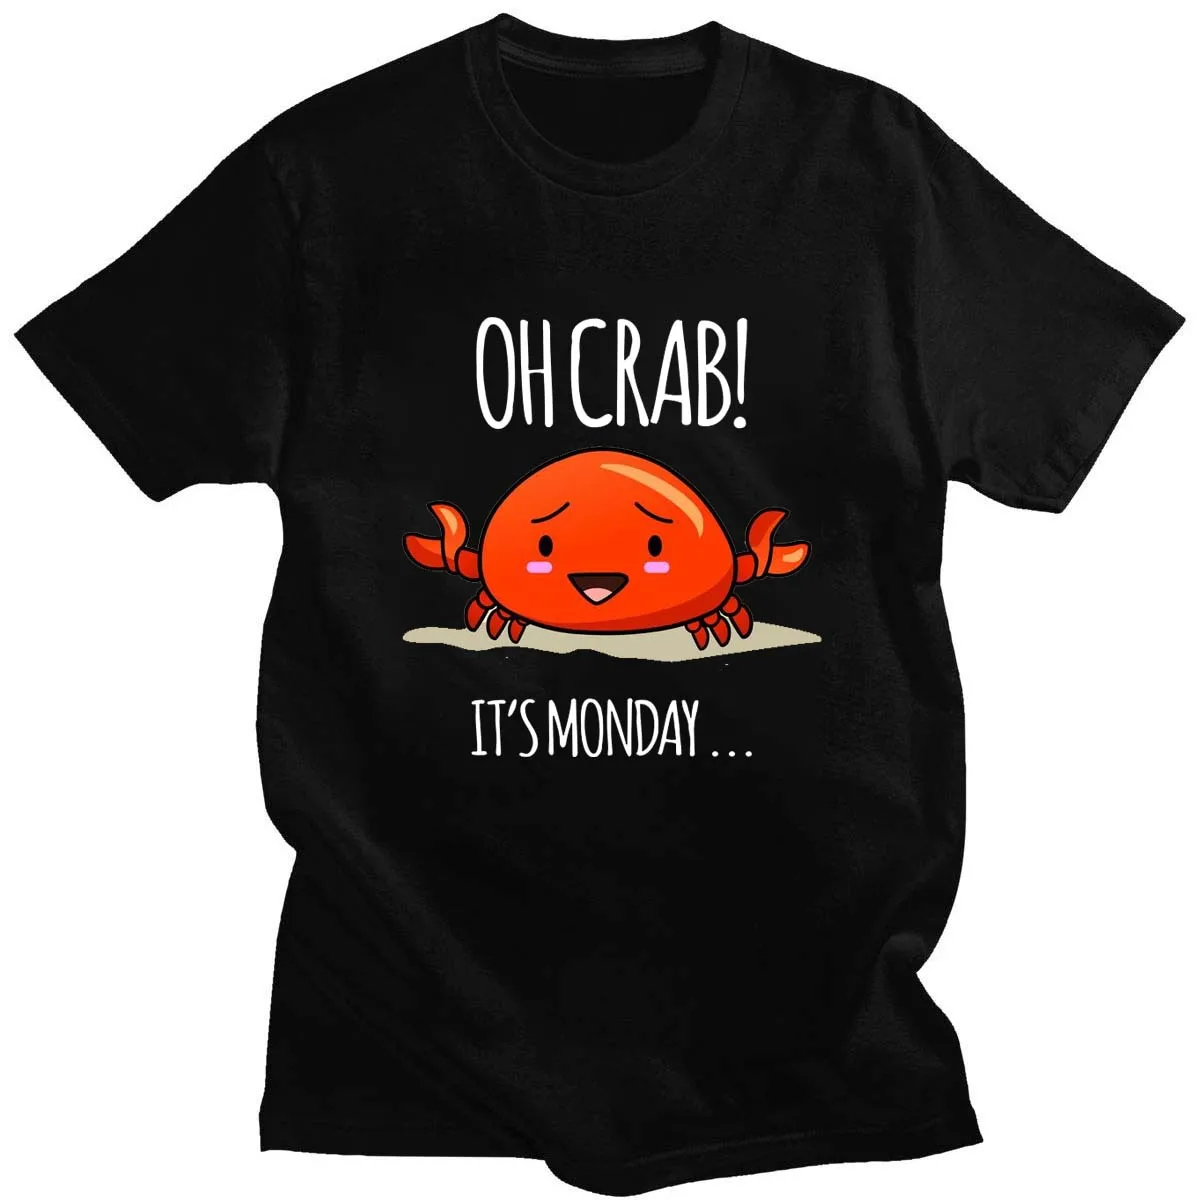 gym t shirts for men 2021 Summer New Product Funny Crab Print T-Shirt Pure Cotton Round Neck Unisex 14 Color Short Sleeve Casual Daily Cute Top white t shirt T-Shirts